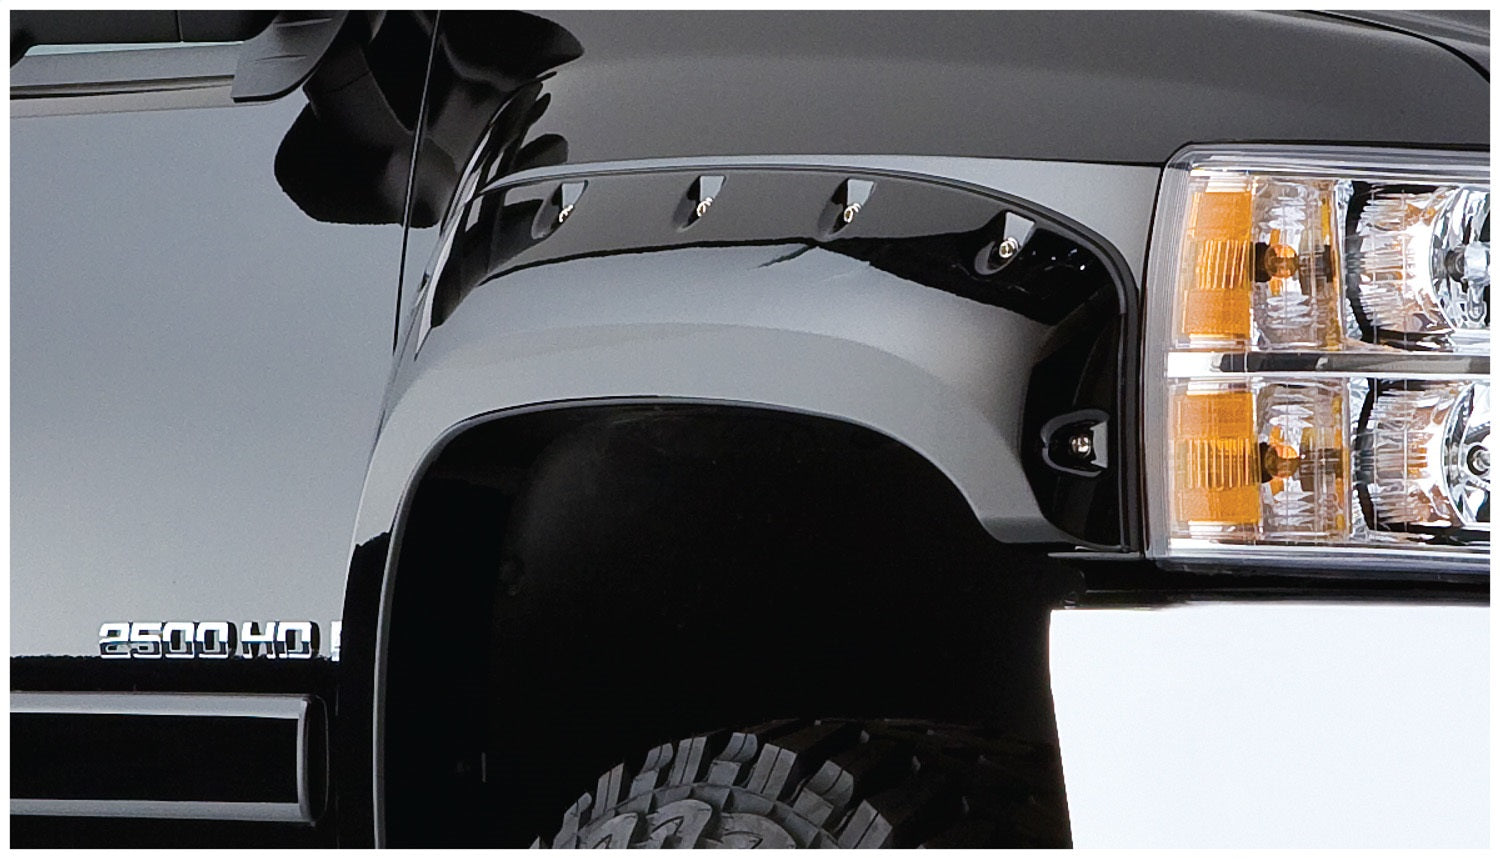 Bushwacker 20043-02 Black Cutout Style Smooth Finish Front Fender Flares for 1999-2010 Ford F-250 Super Duty Styleside w/98 in. Bed; 1999-2007 F-350 to F-550 Super Duty